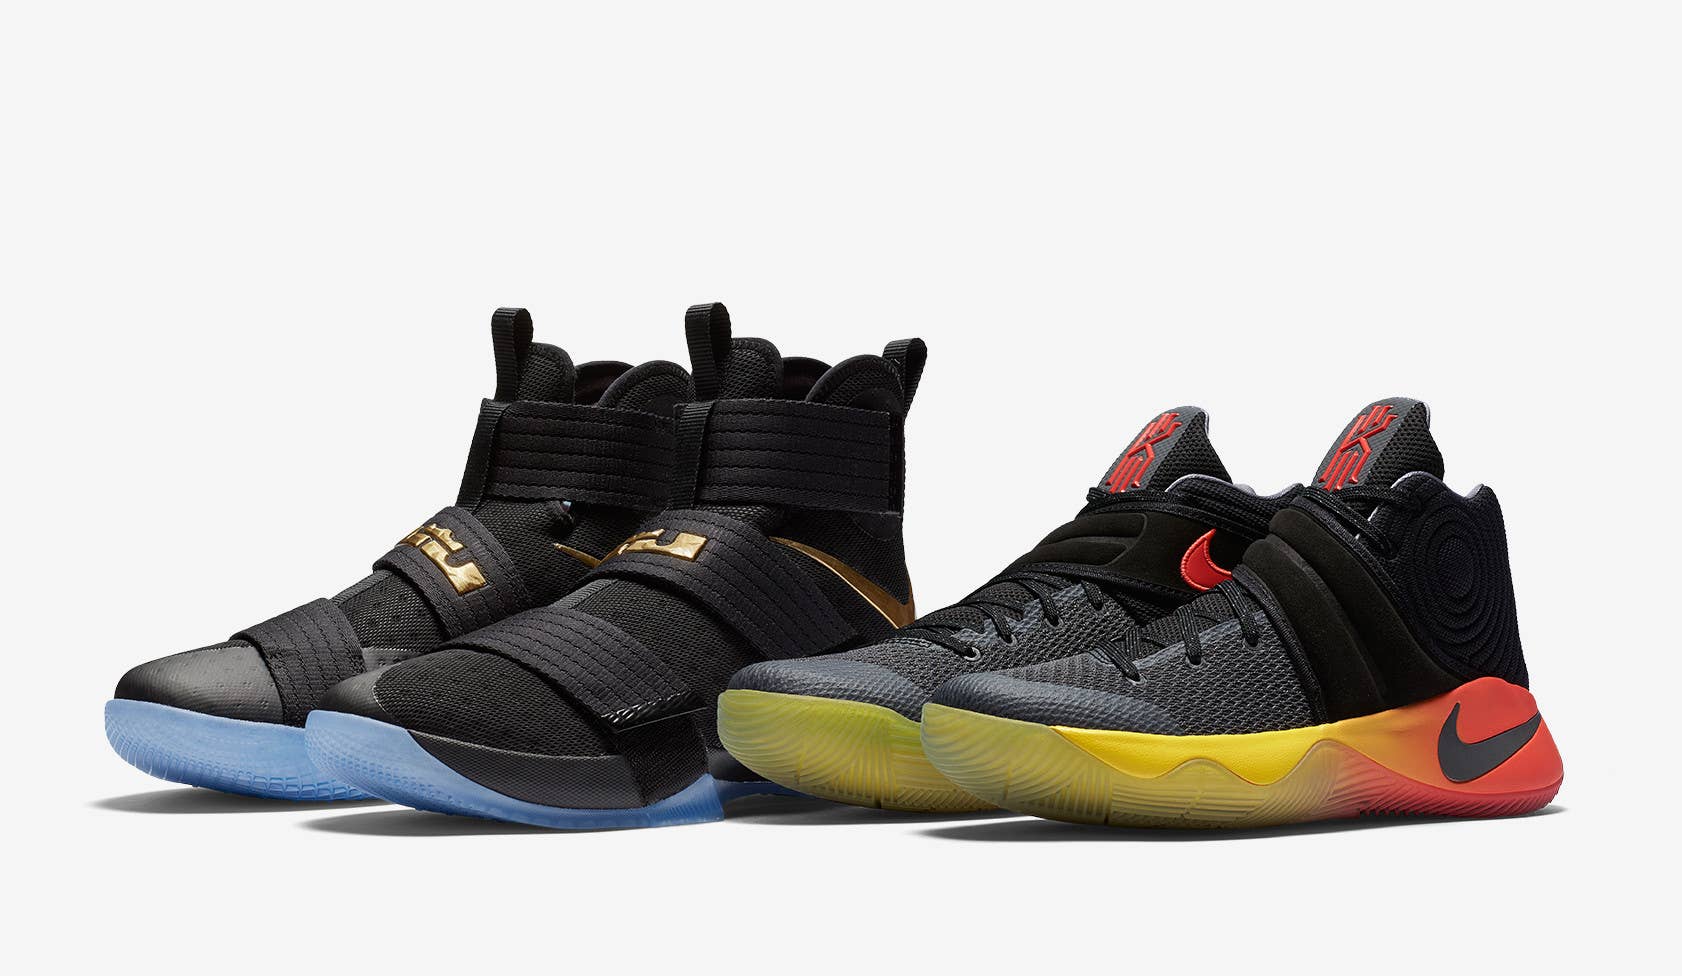 Nike LeBron Soldier 10 & Kyrie 2 Championship Pack Forty Ones